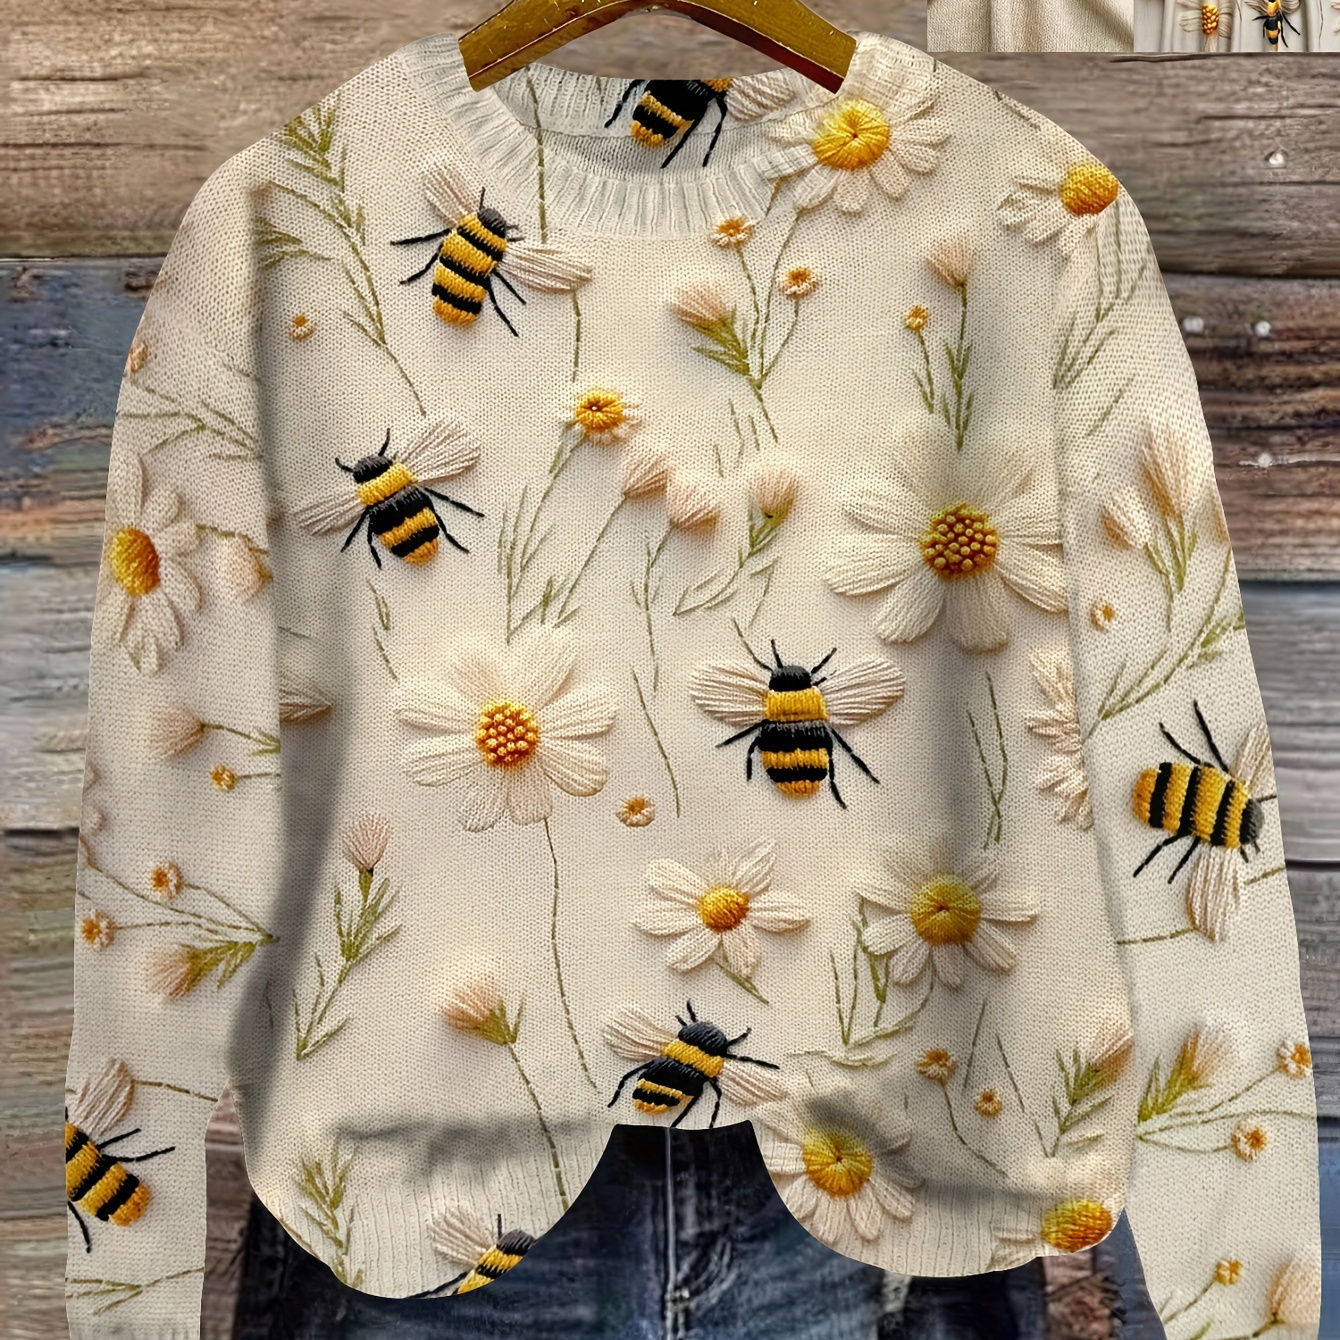 

Flower & Bee Pattern Sweater, Versatile Crew Neck Long Sleeve Sweater For Spring & Fall, Women's Clothing